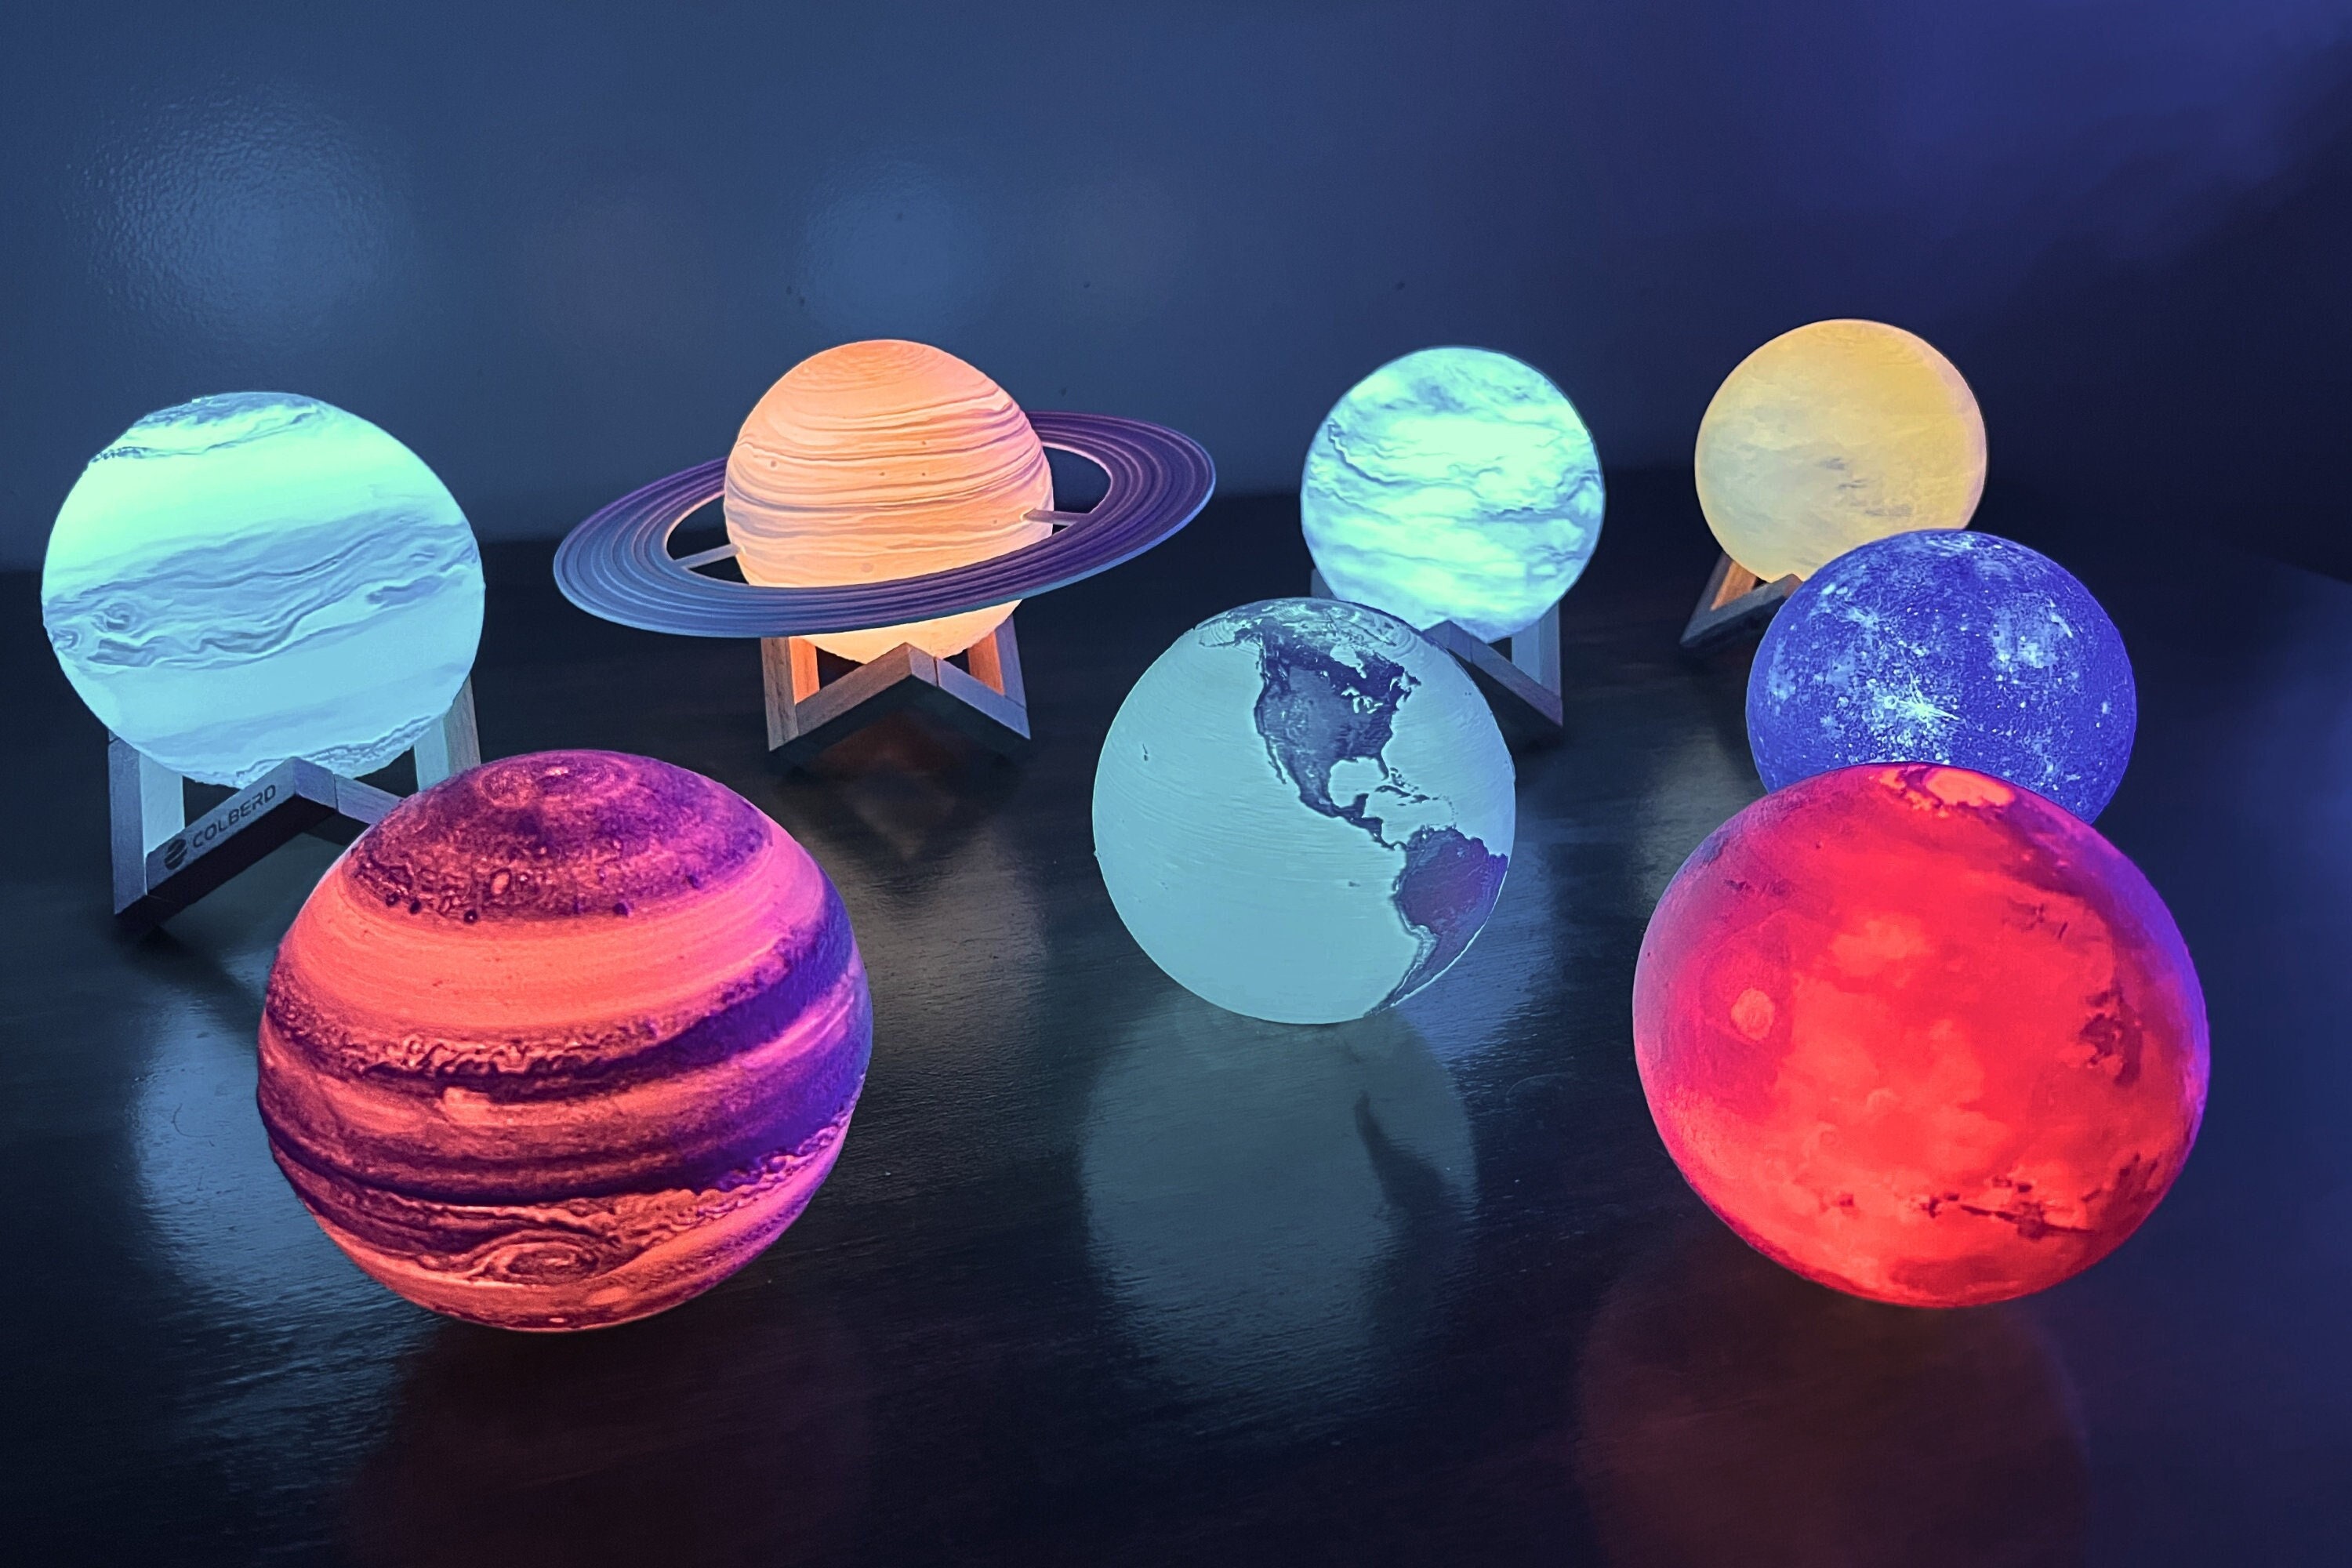 Paint Your Own Moon Lamp Kit, Cool DIY 3D Space Moon Night Light